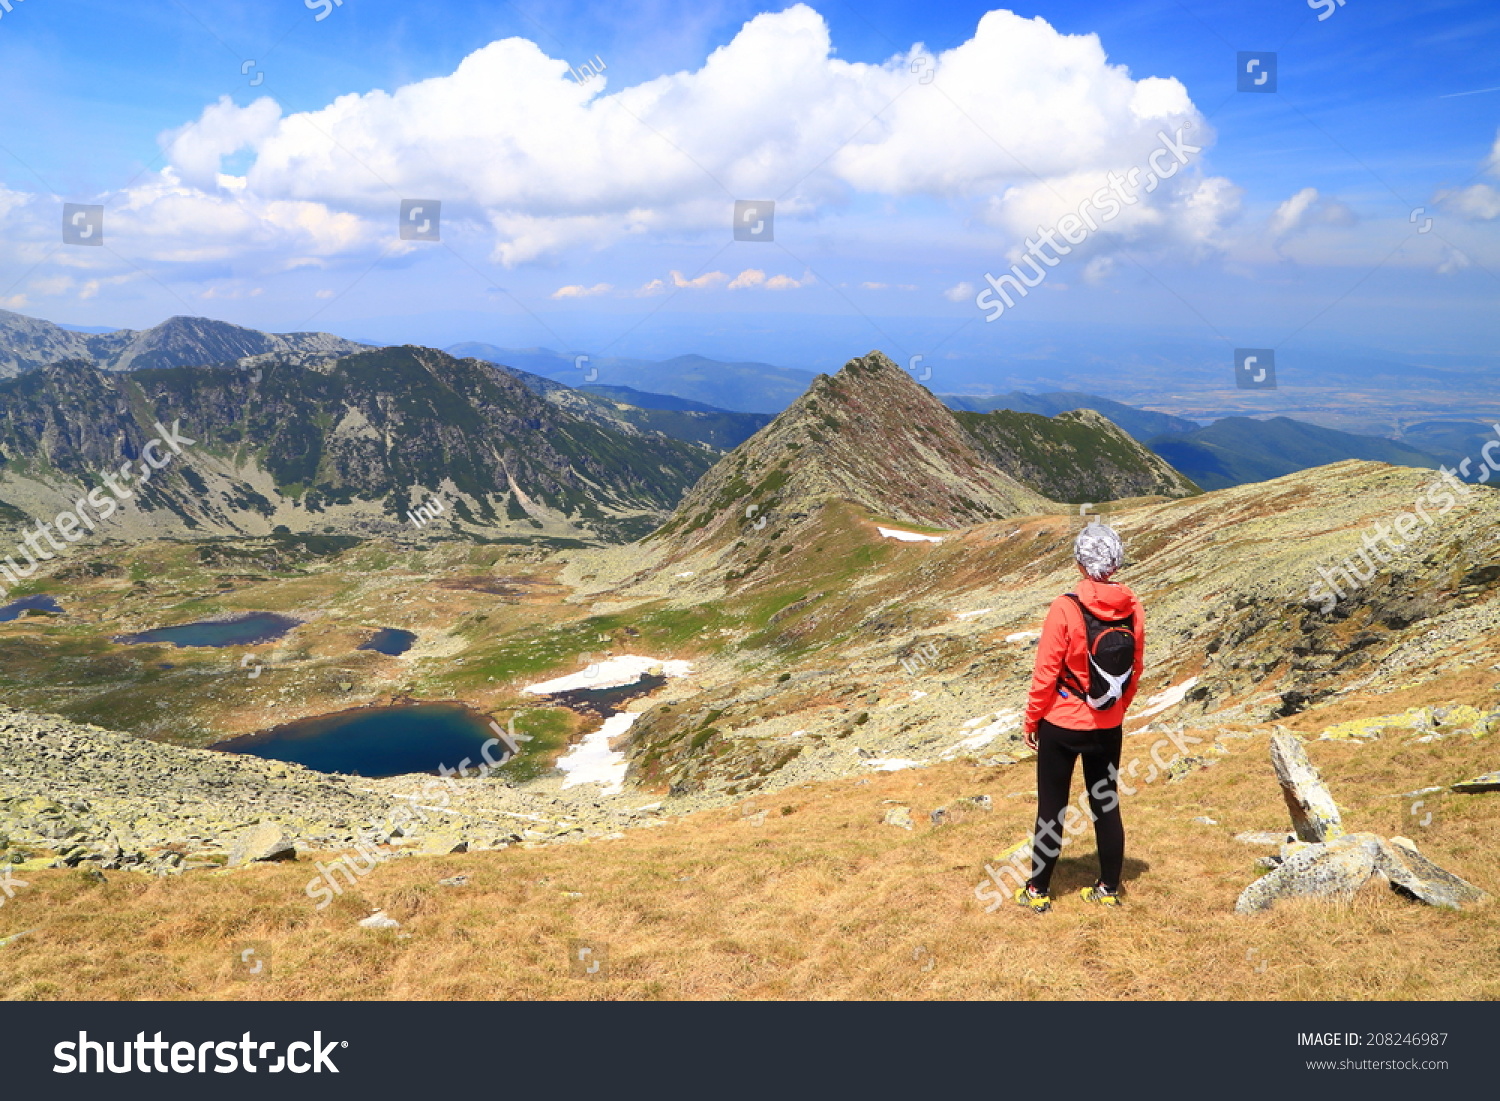 Beautiful mountain landscape with young woman standing and admiring the view #208246987